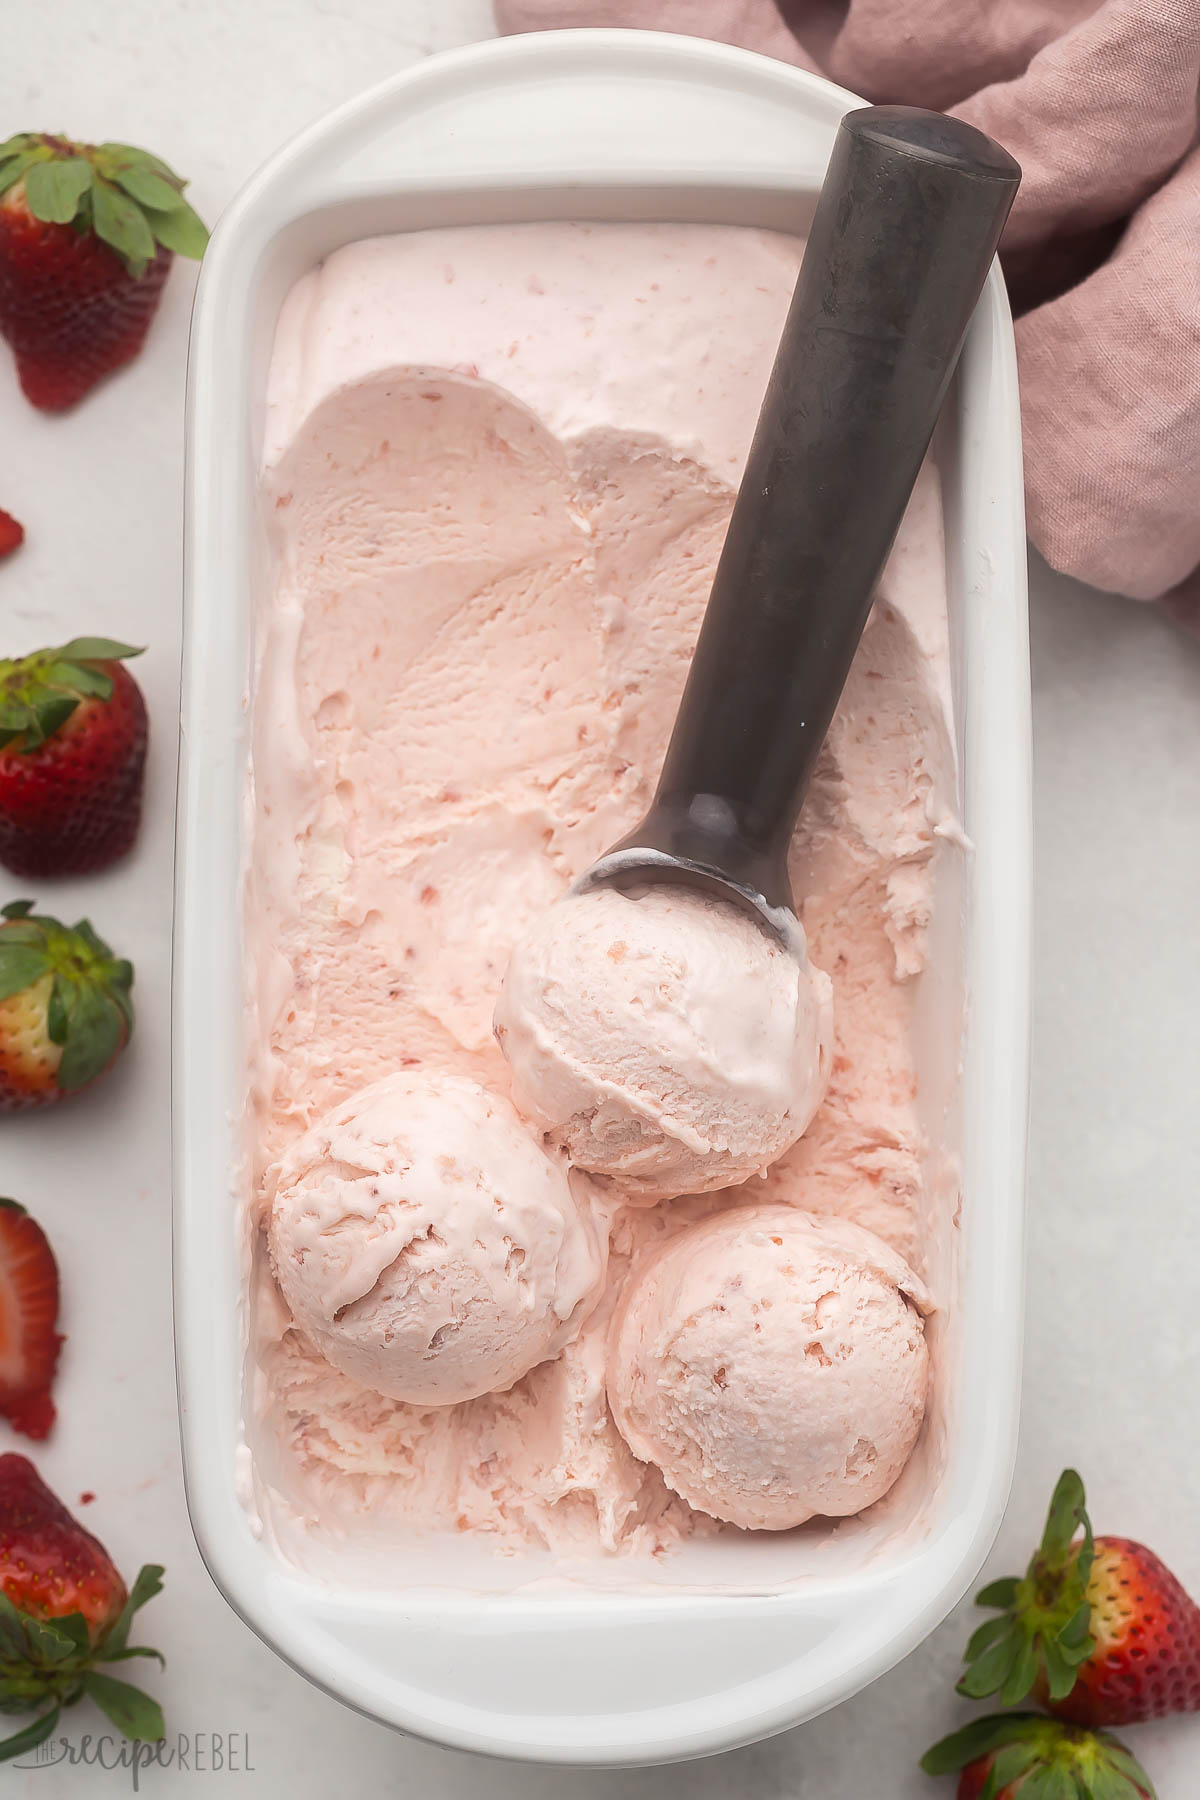 Top view of a white dish filled with strawberry ice cream in it, being scooped out by an ice cream scoop.